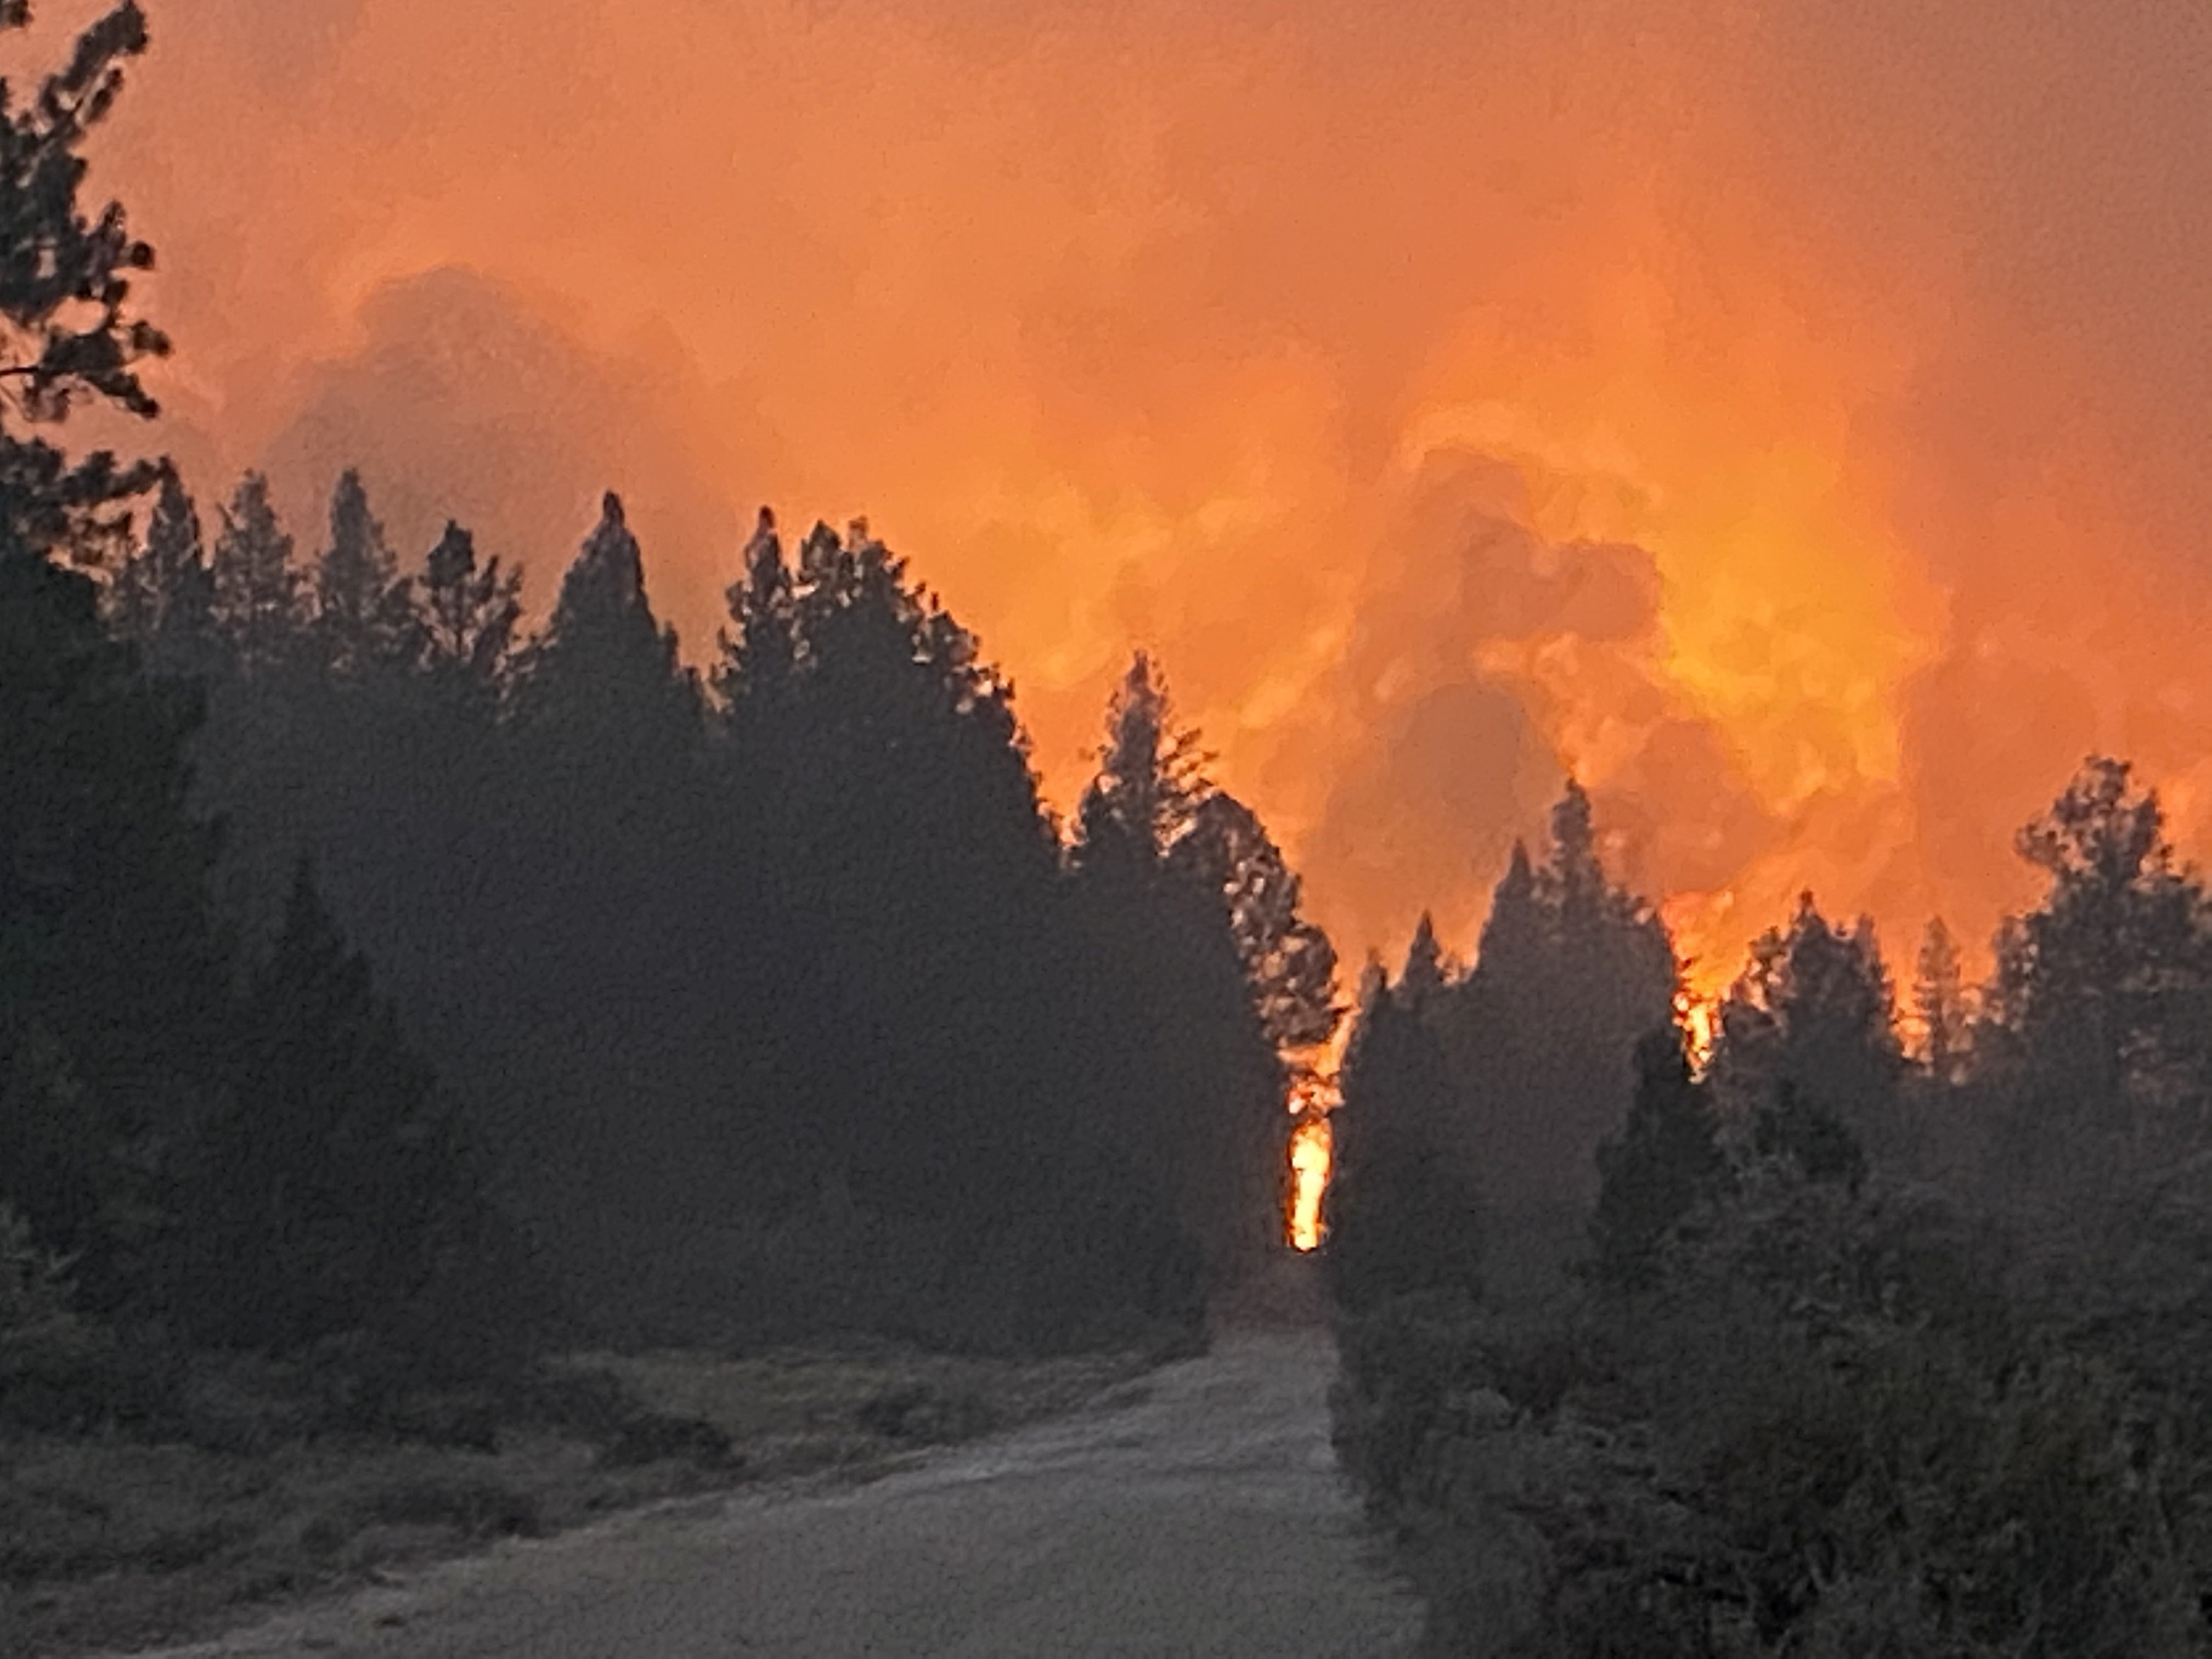 Oregon wildfire displaces 2,000 residents as blazes flare across U.S